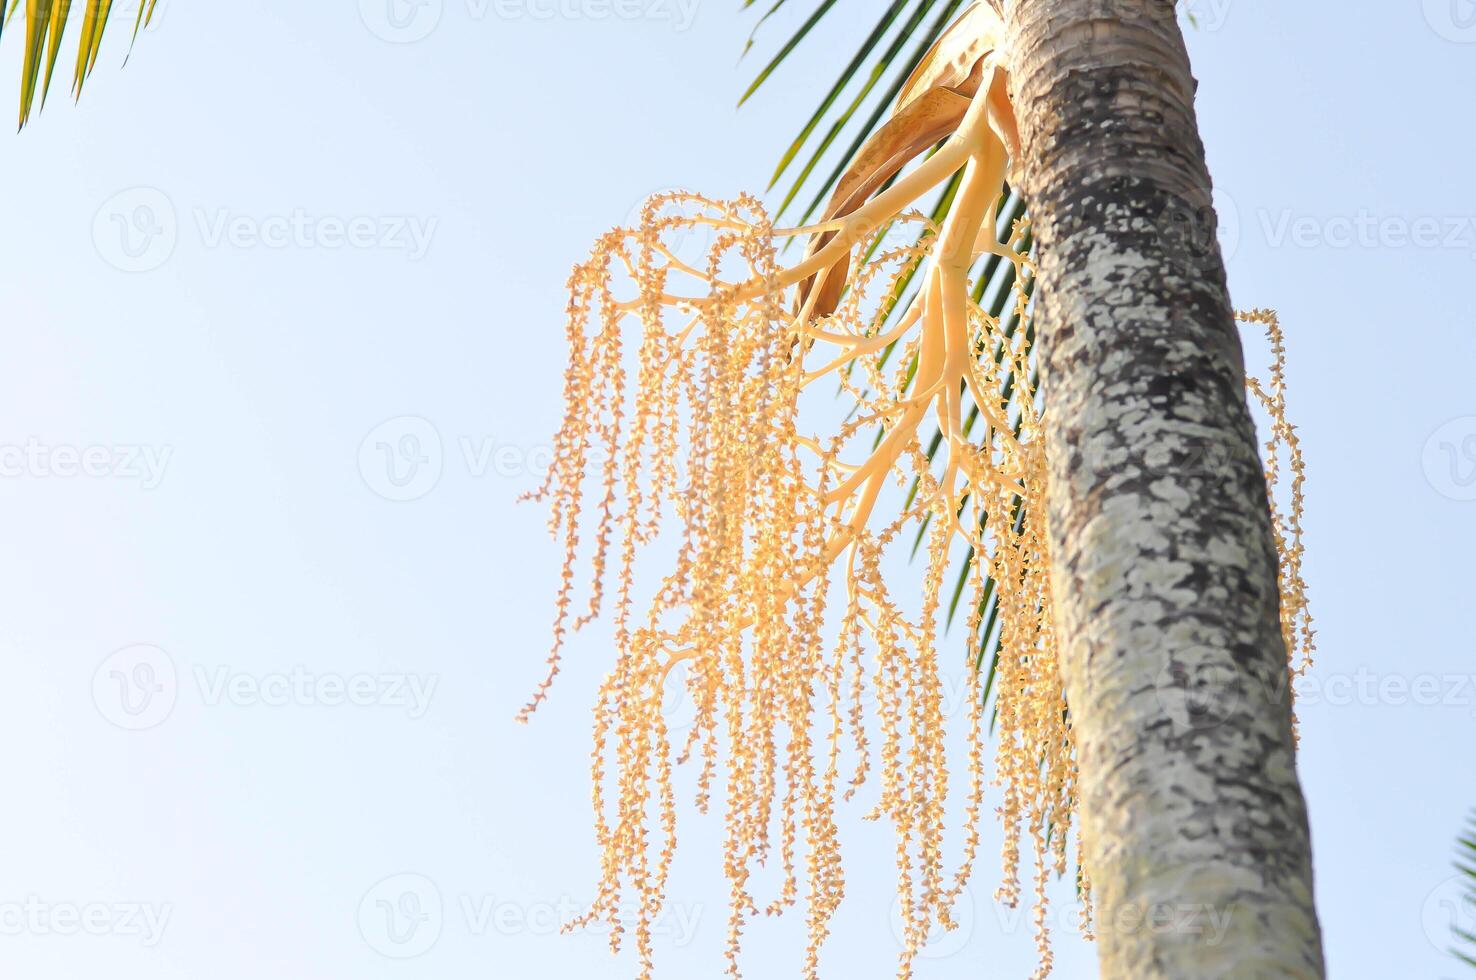 Normanbya normanbyi, Wodyetia bifurcata AK Irvine or Foxtail palm or ARECACEAE or PALMAE or seed of betel palm or betel nut and sky photo